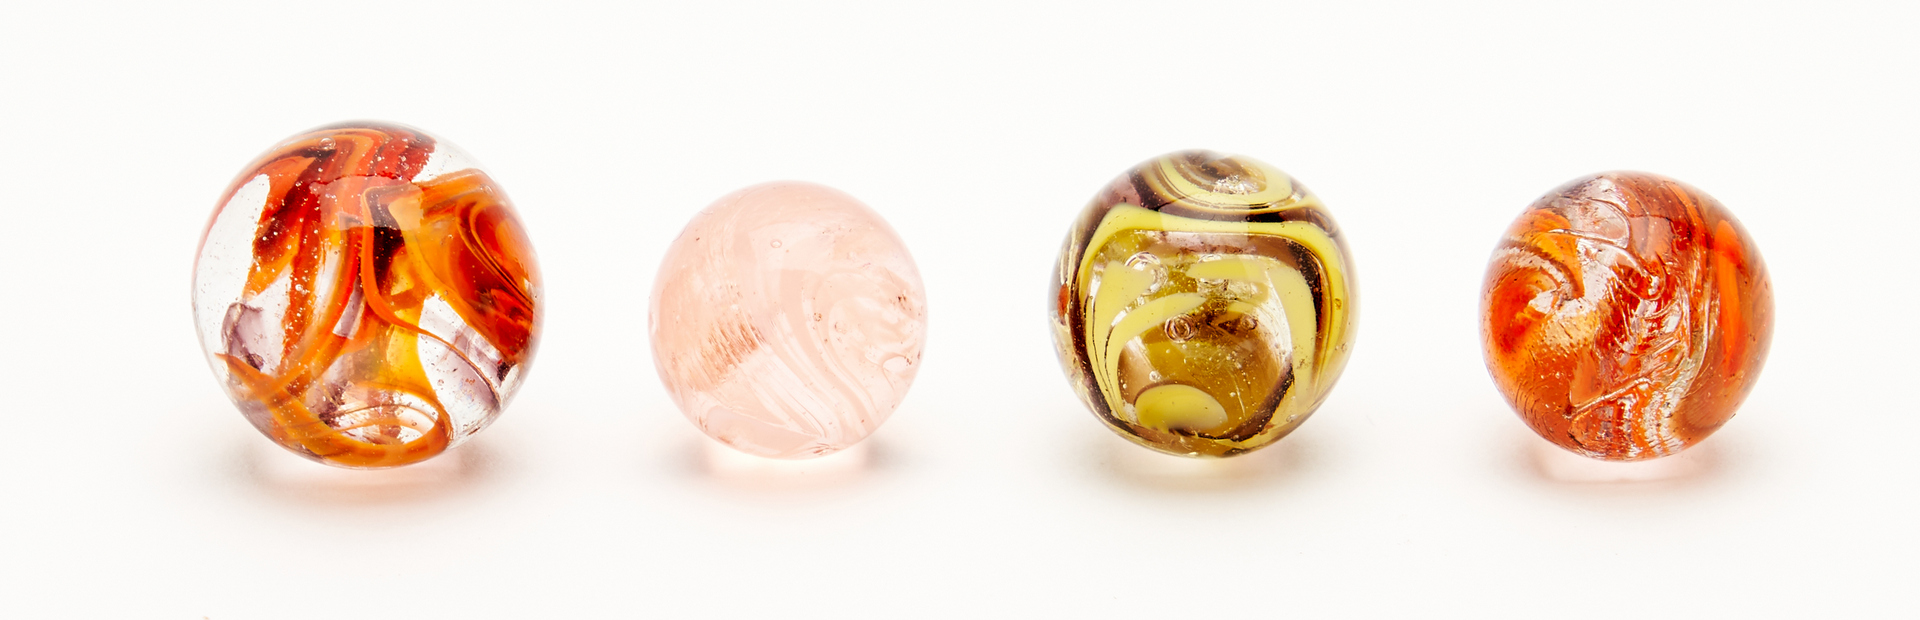 Lot 1064: 28 Marbles, Possibly Christensen Agate Company